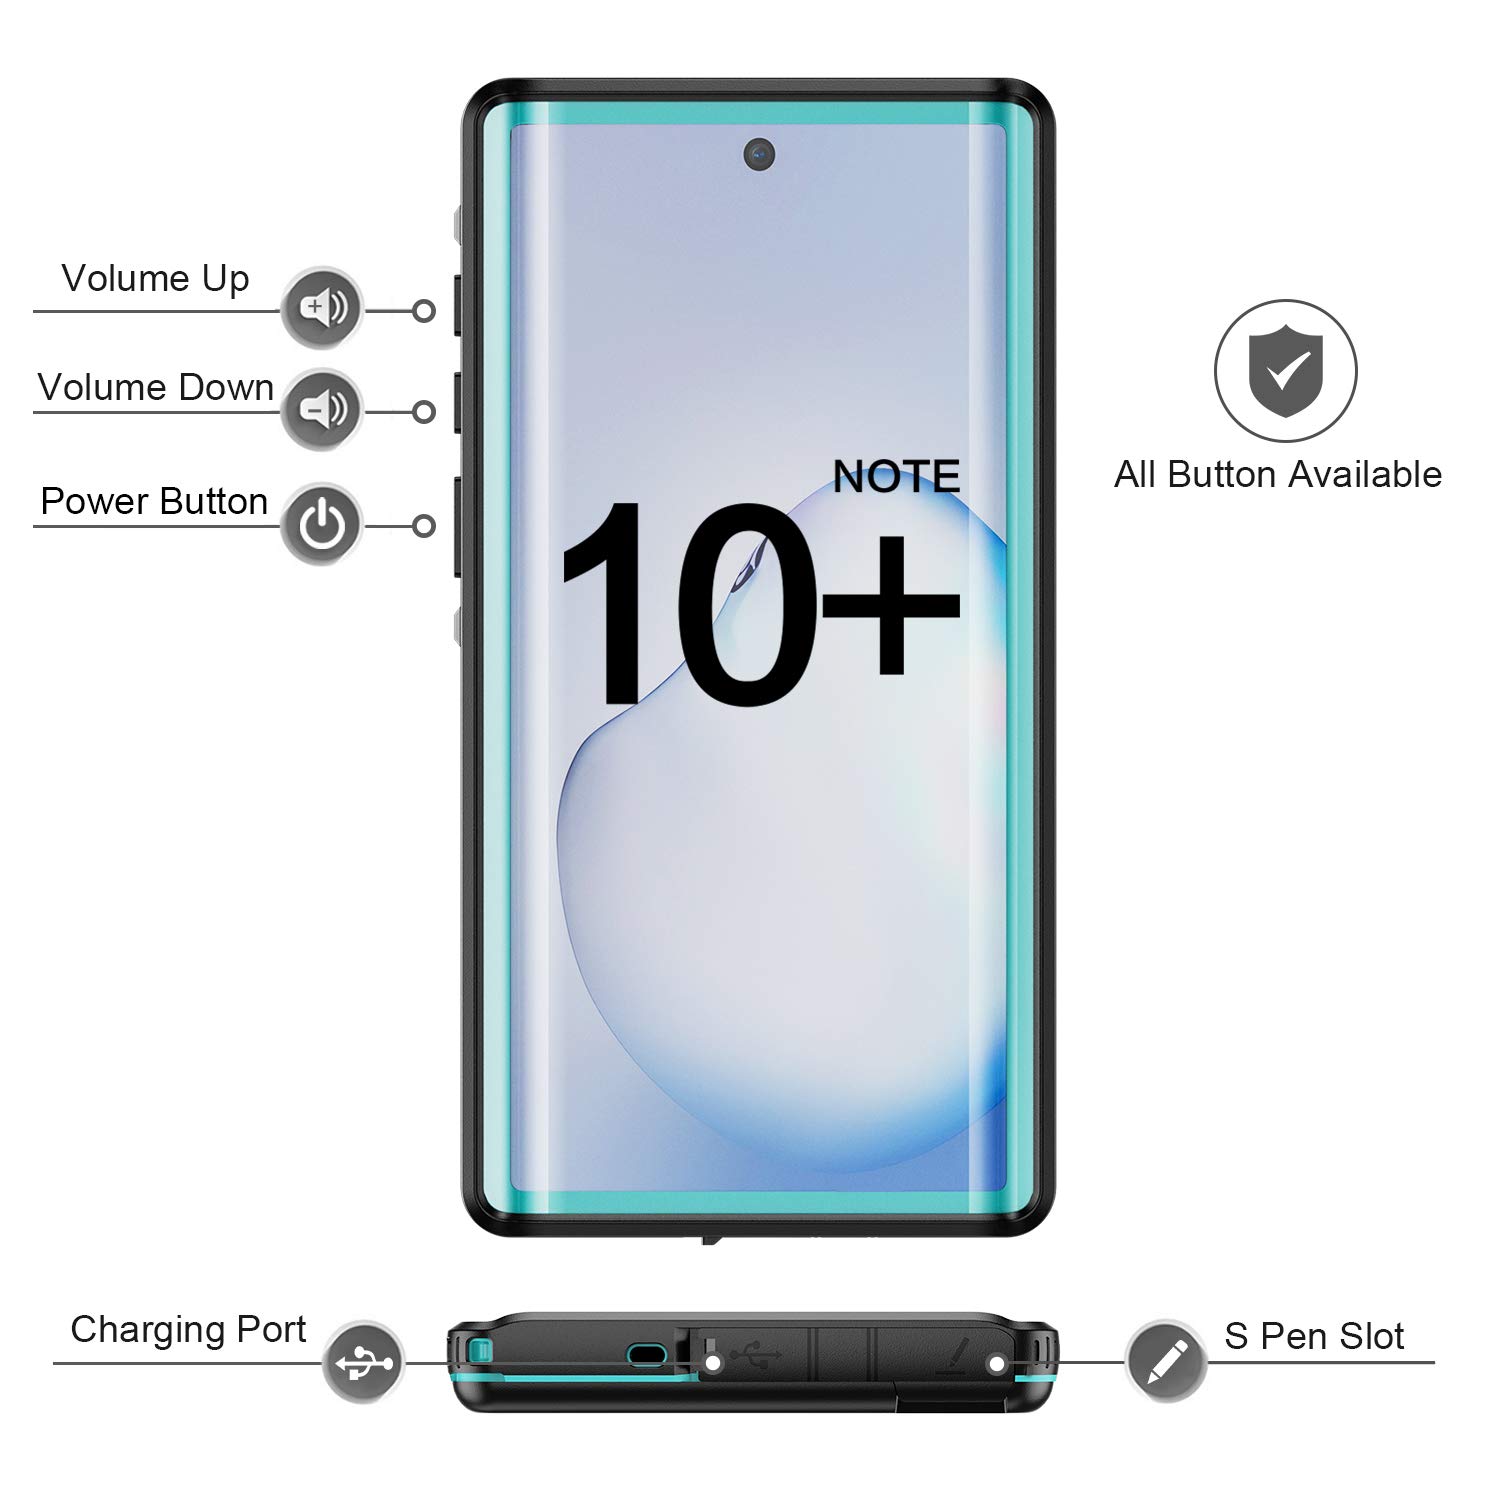 Fansteck Samsung Galaxy Note 10+ Plus Waterproof Case, IP68 Waterproof/Snowproof/Shockproof/Dirtproof, Fully Sealed Underwater Protective Cover for Samsung Galaxy Note10 Plus 5G(6.8-inch) (Grass blue)